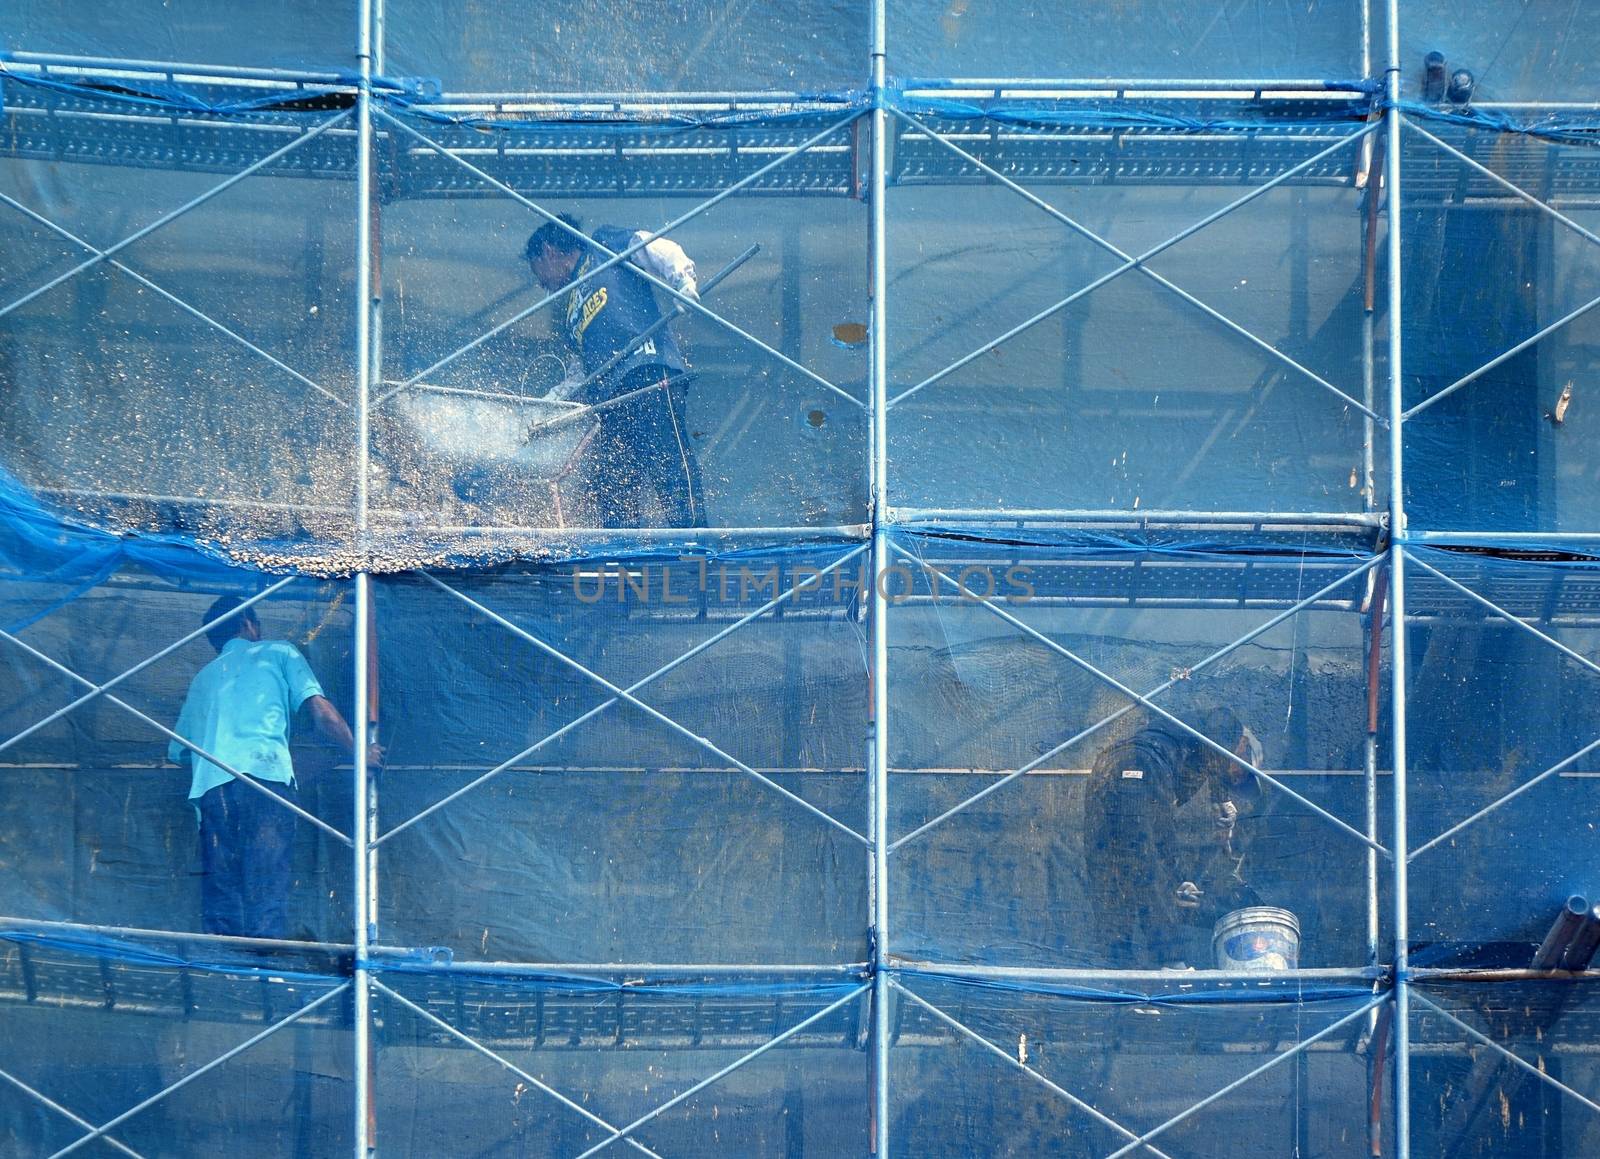 KAOHSIUNG, TAIWAN -- OCTOBER 5, 2014: Unidentified construction workers work on a new building on narrow scaffolding.